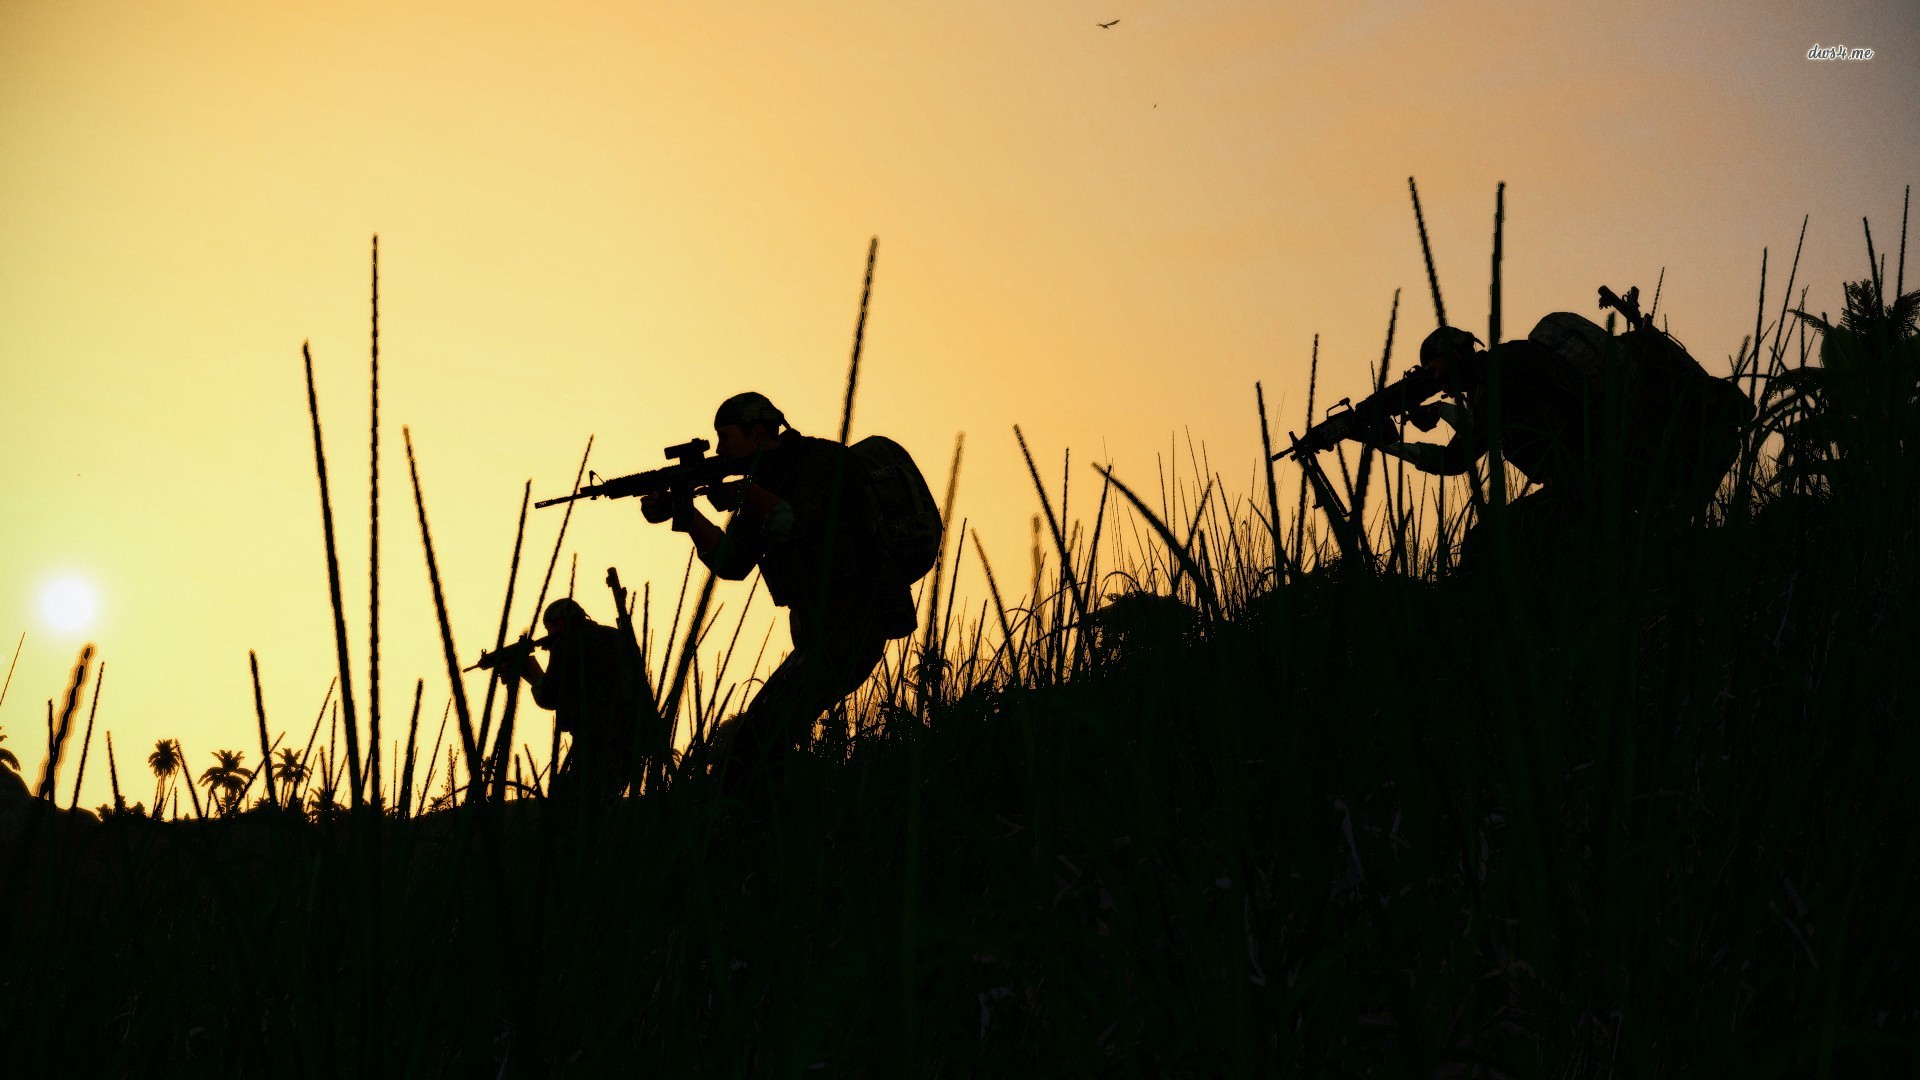 Silhouettes of soldiers attacking wallpaper - Photography 